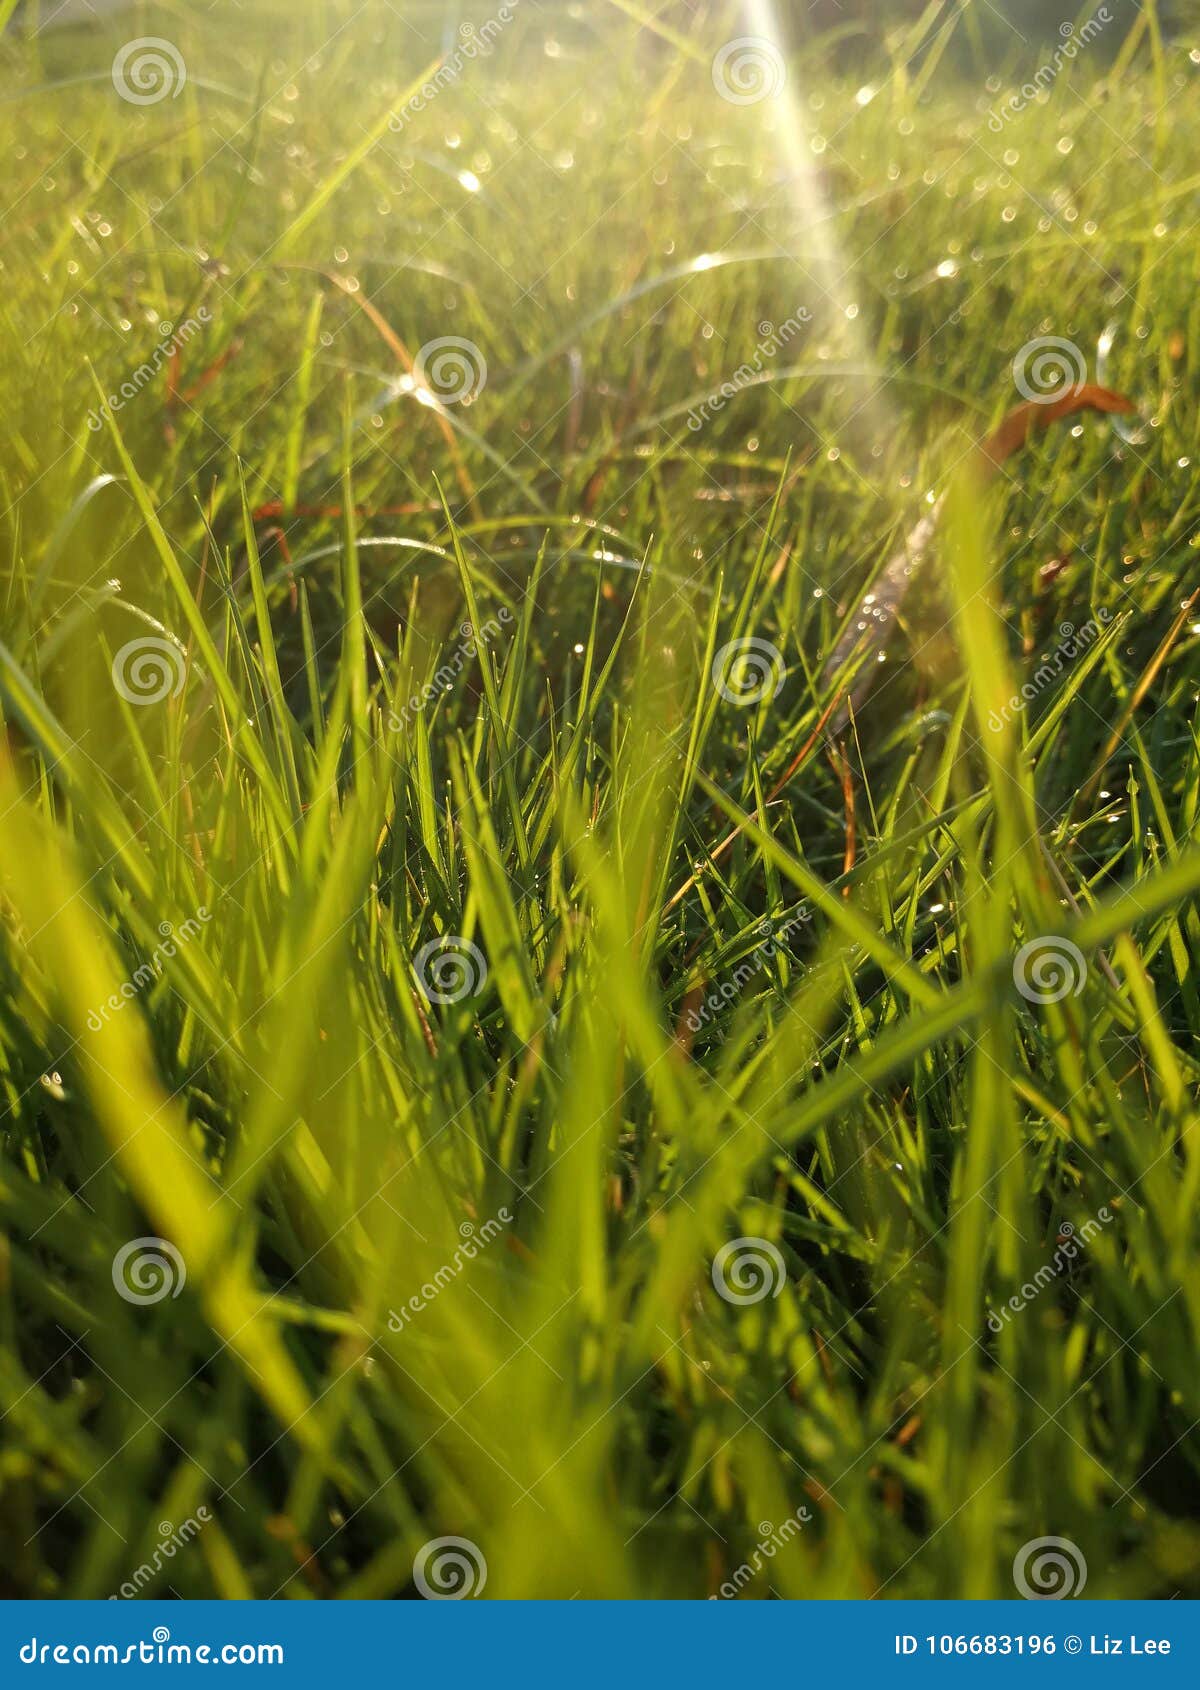 List 99+ Images why is there dew on the grass in the morning Full HD, 2k, 4k